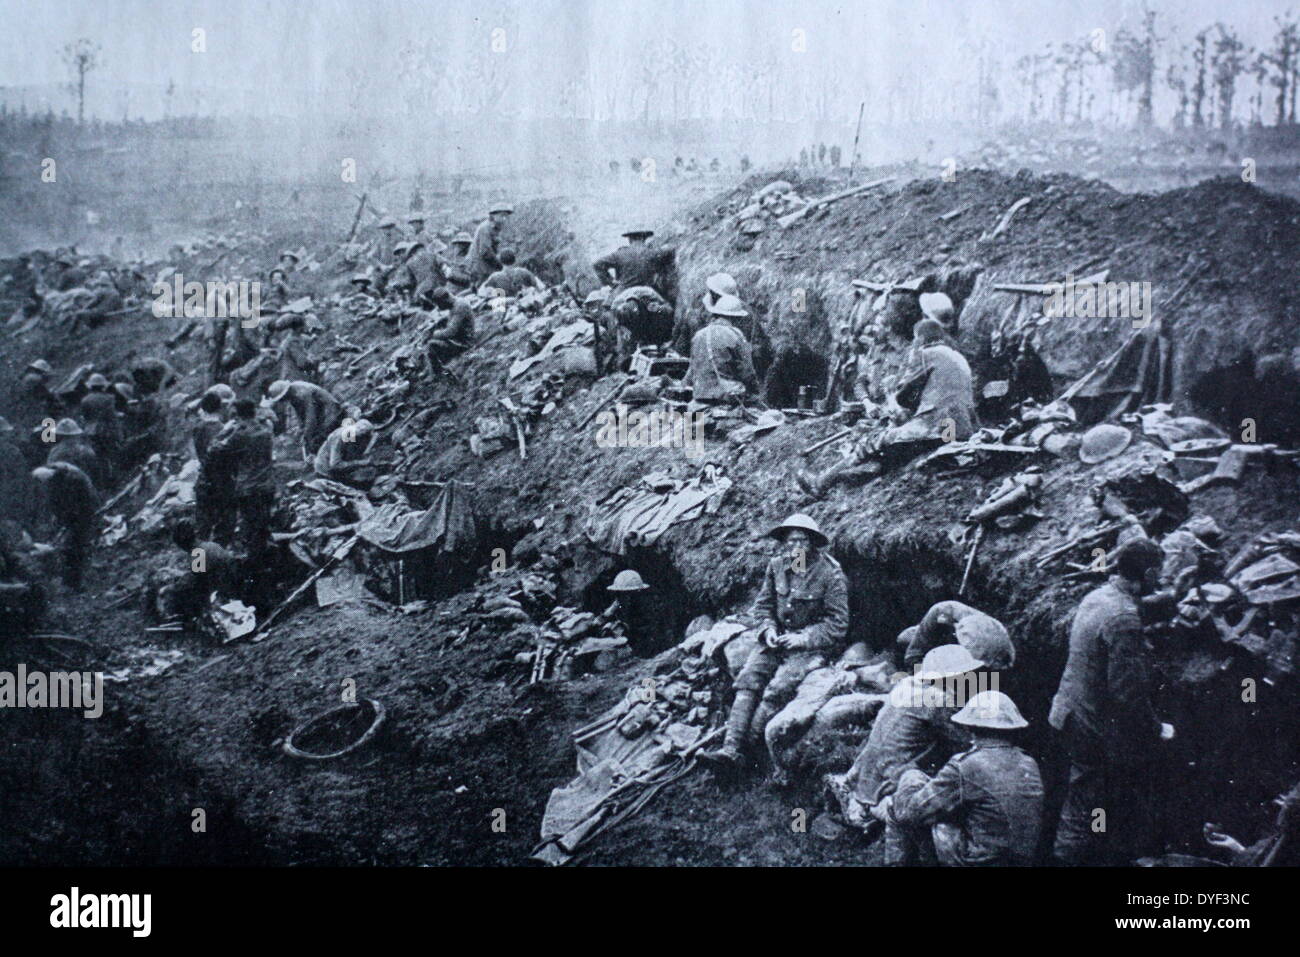 Photograph of the trenches during the First World War. Showing the cramped and crowded conditions the soldiers lived in in the trenches. Circa 1914-1918 Stock Photo